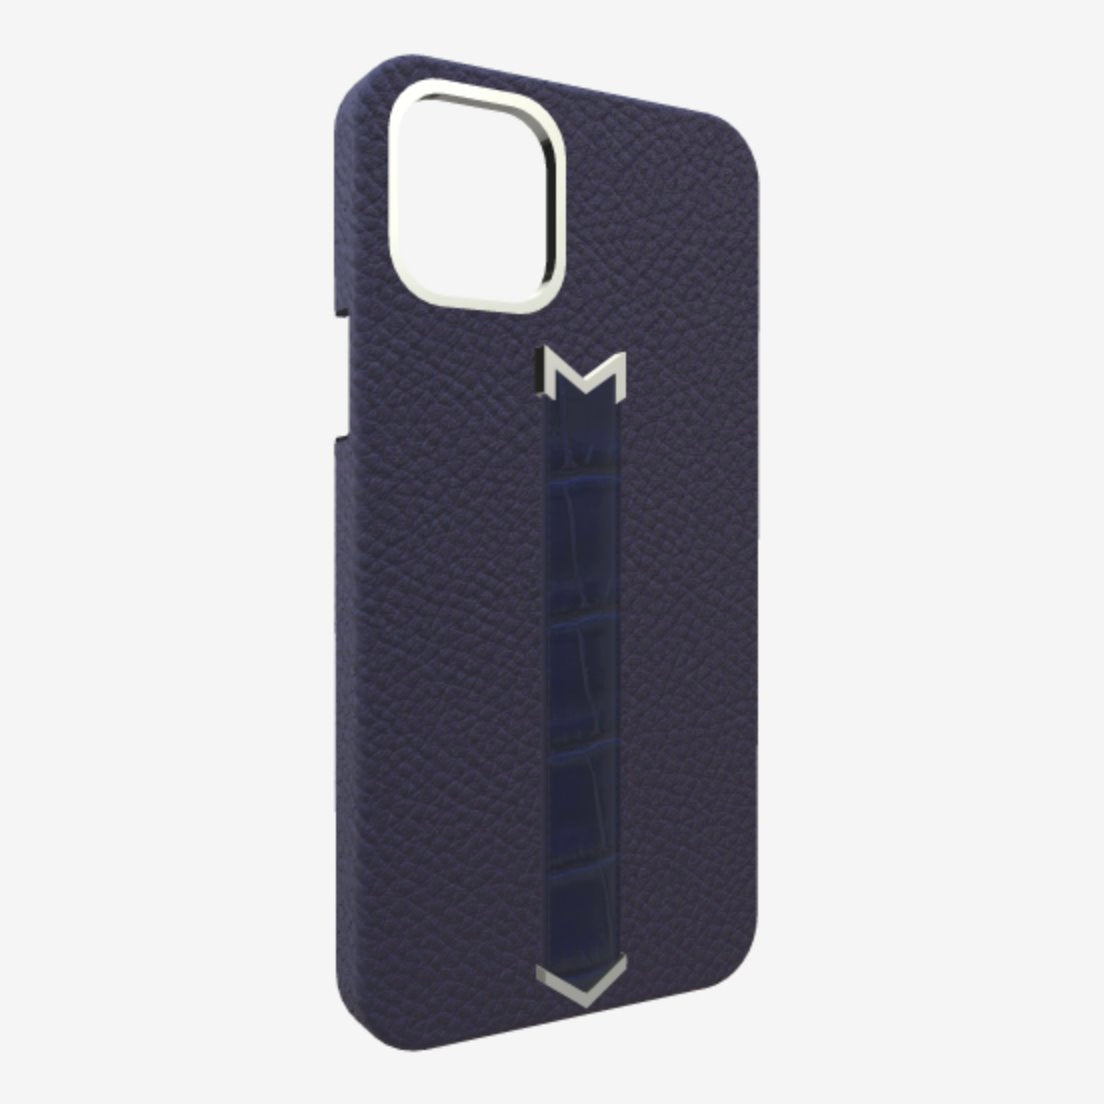 Silver Finger Strap Case for iPhone 13 Pro in Genuine Calfskin and Alligator Navy-Blue Navy-Blue 